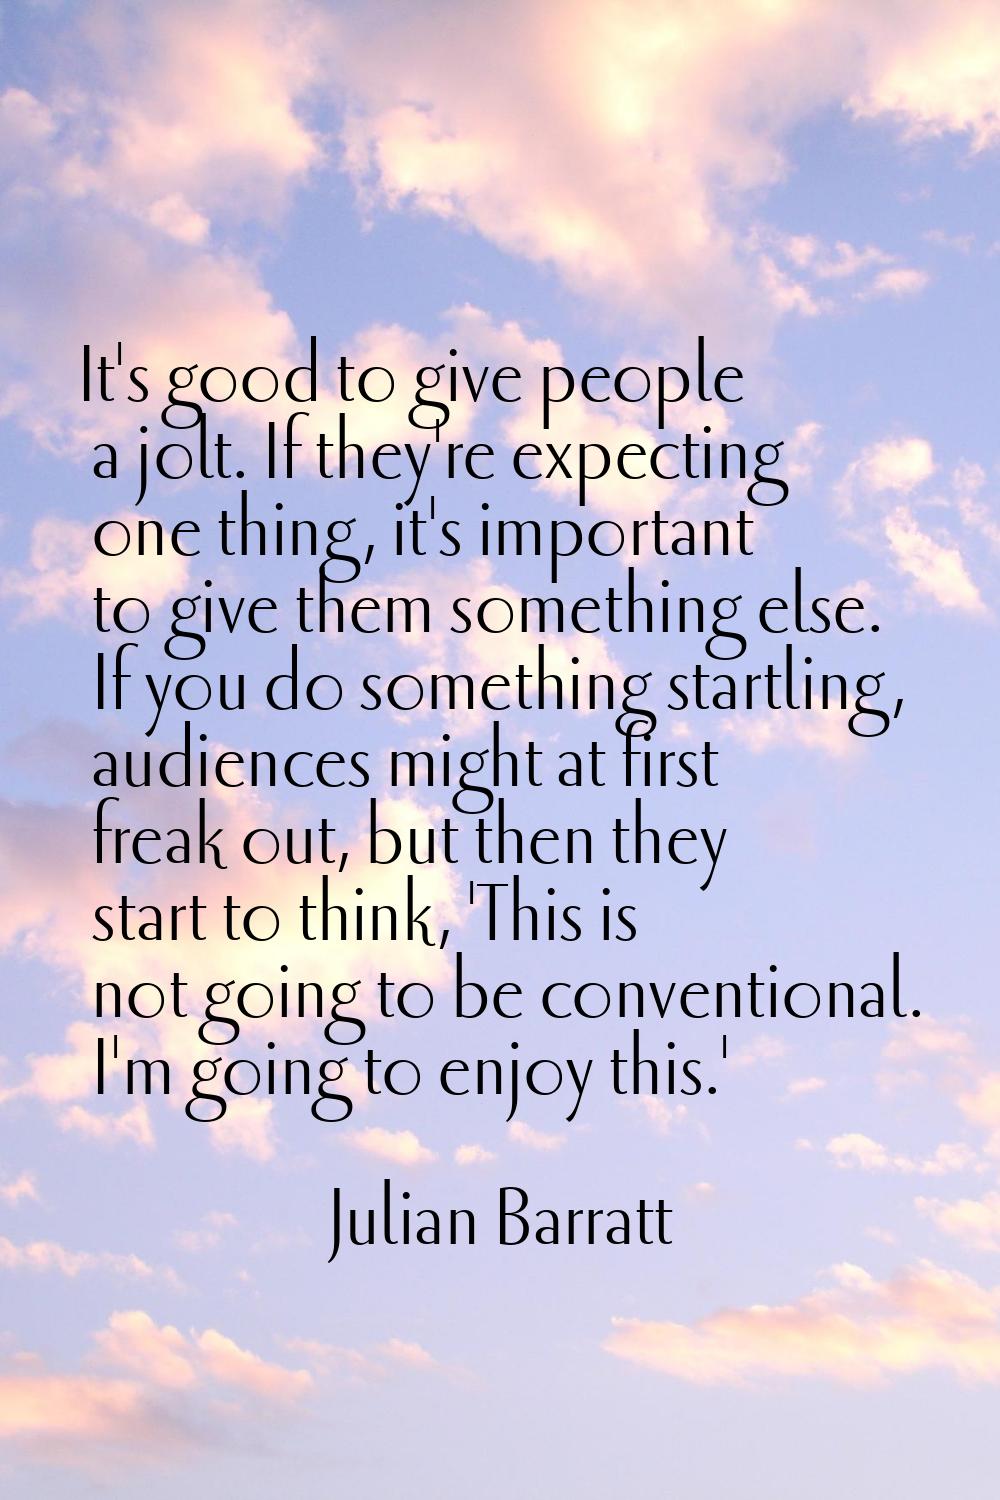 It's good to give people a jolt. If they're expecting one thing, it's important to give them someth